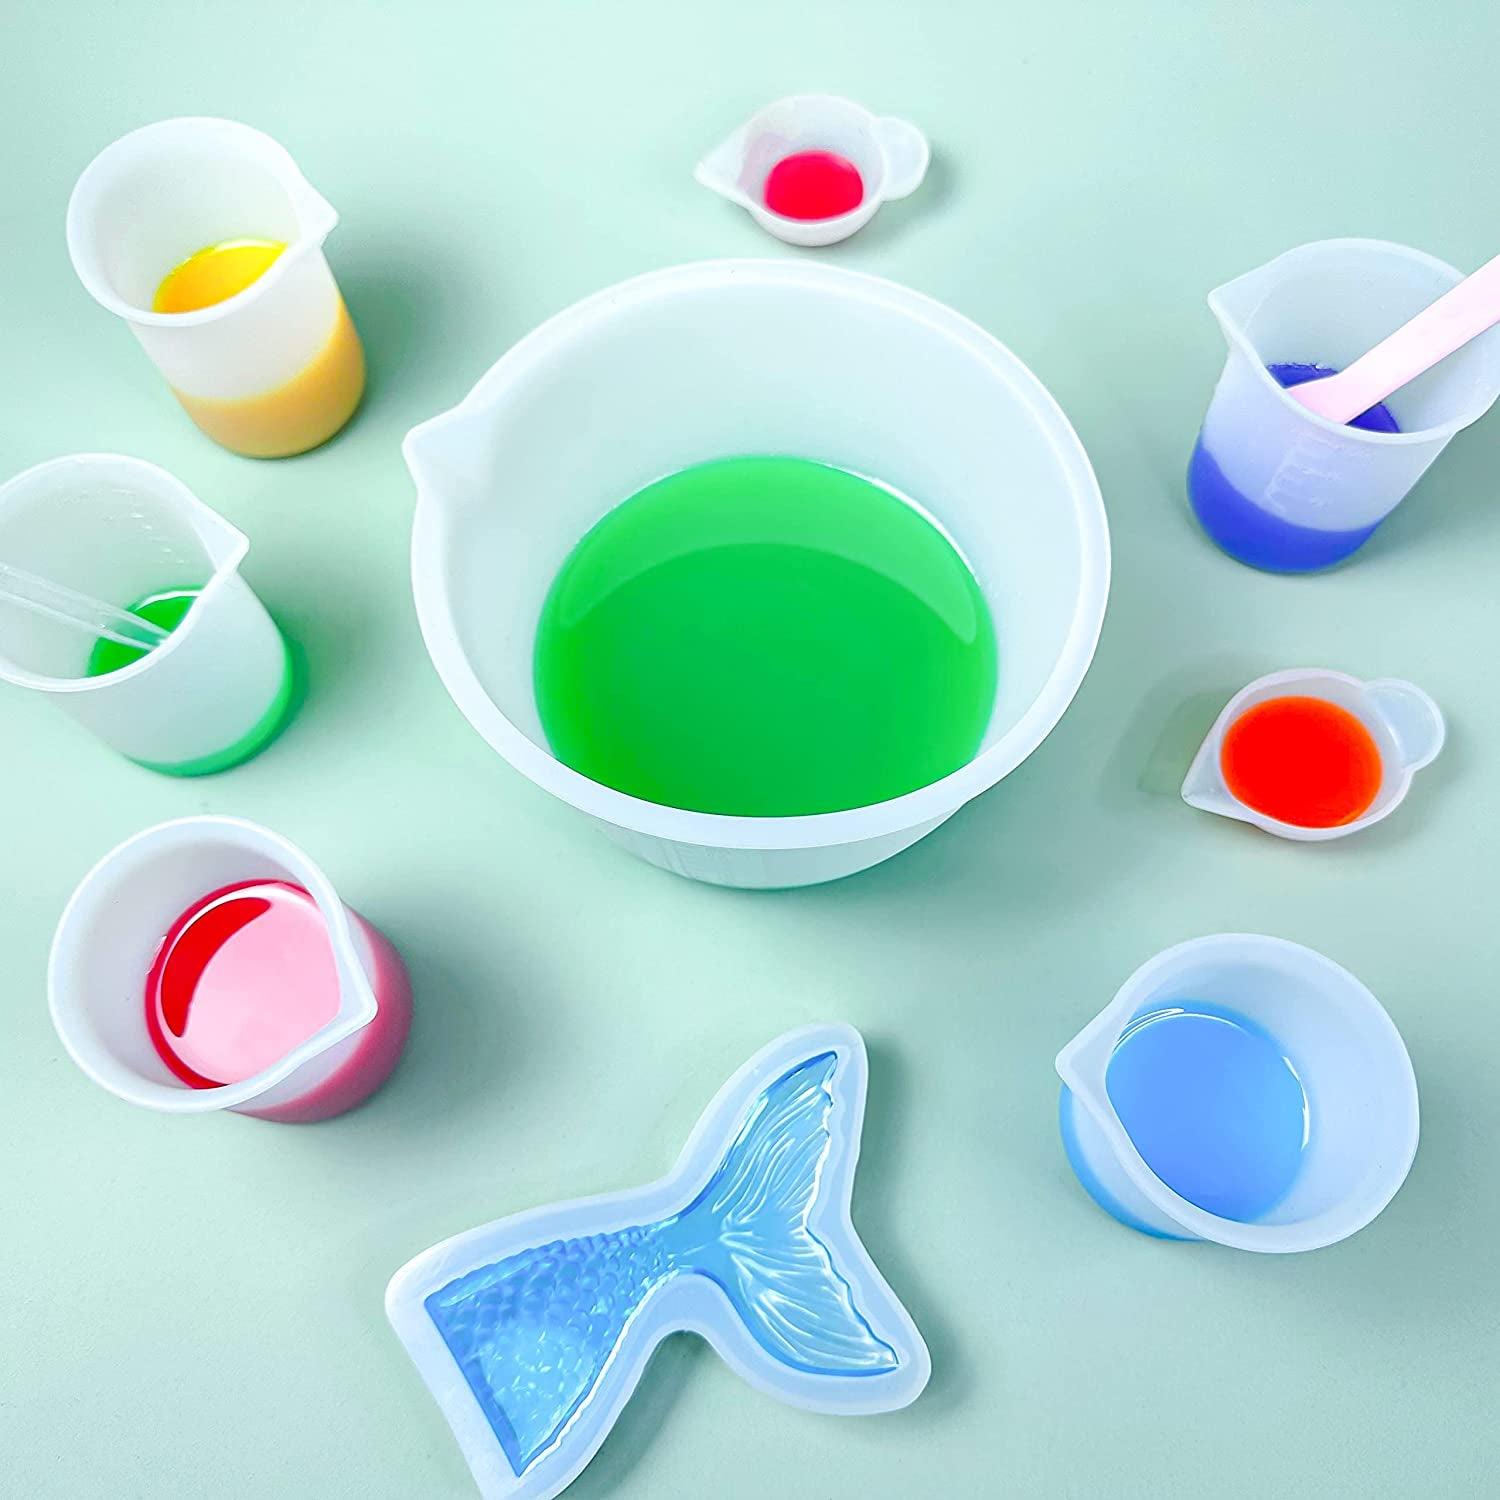 LET'S RESIN Silicone Measuring Cups,Resin Supplies with 600ml/20oz&100ml  Thickening&Polishing Resin Mixing Cups,Easy to Clean,Silicone Stir  Sticks,Silicone Cups for Epoxy Resin Mixing